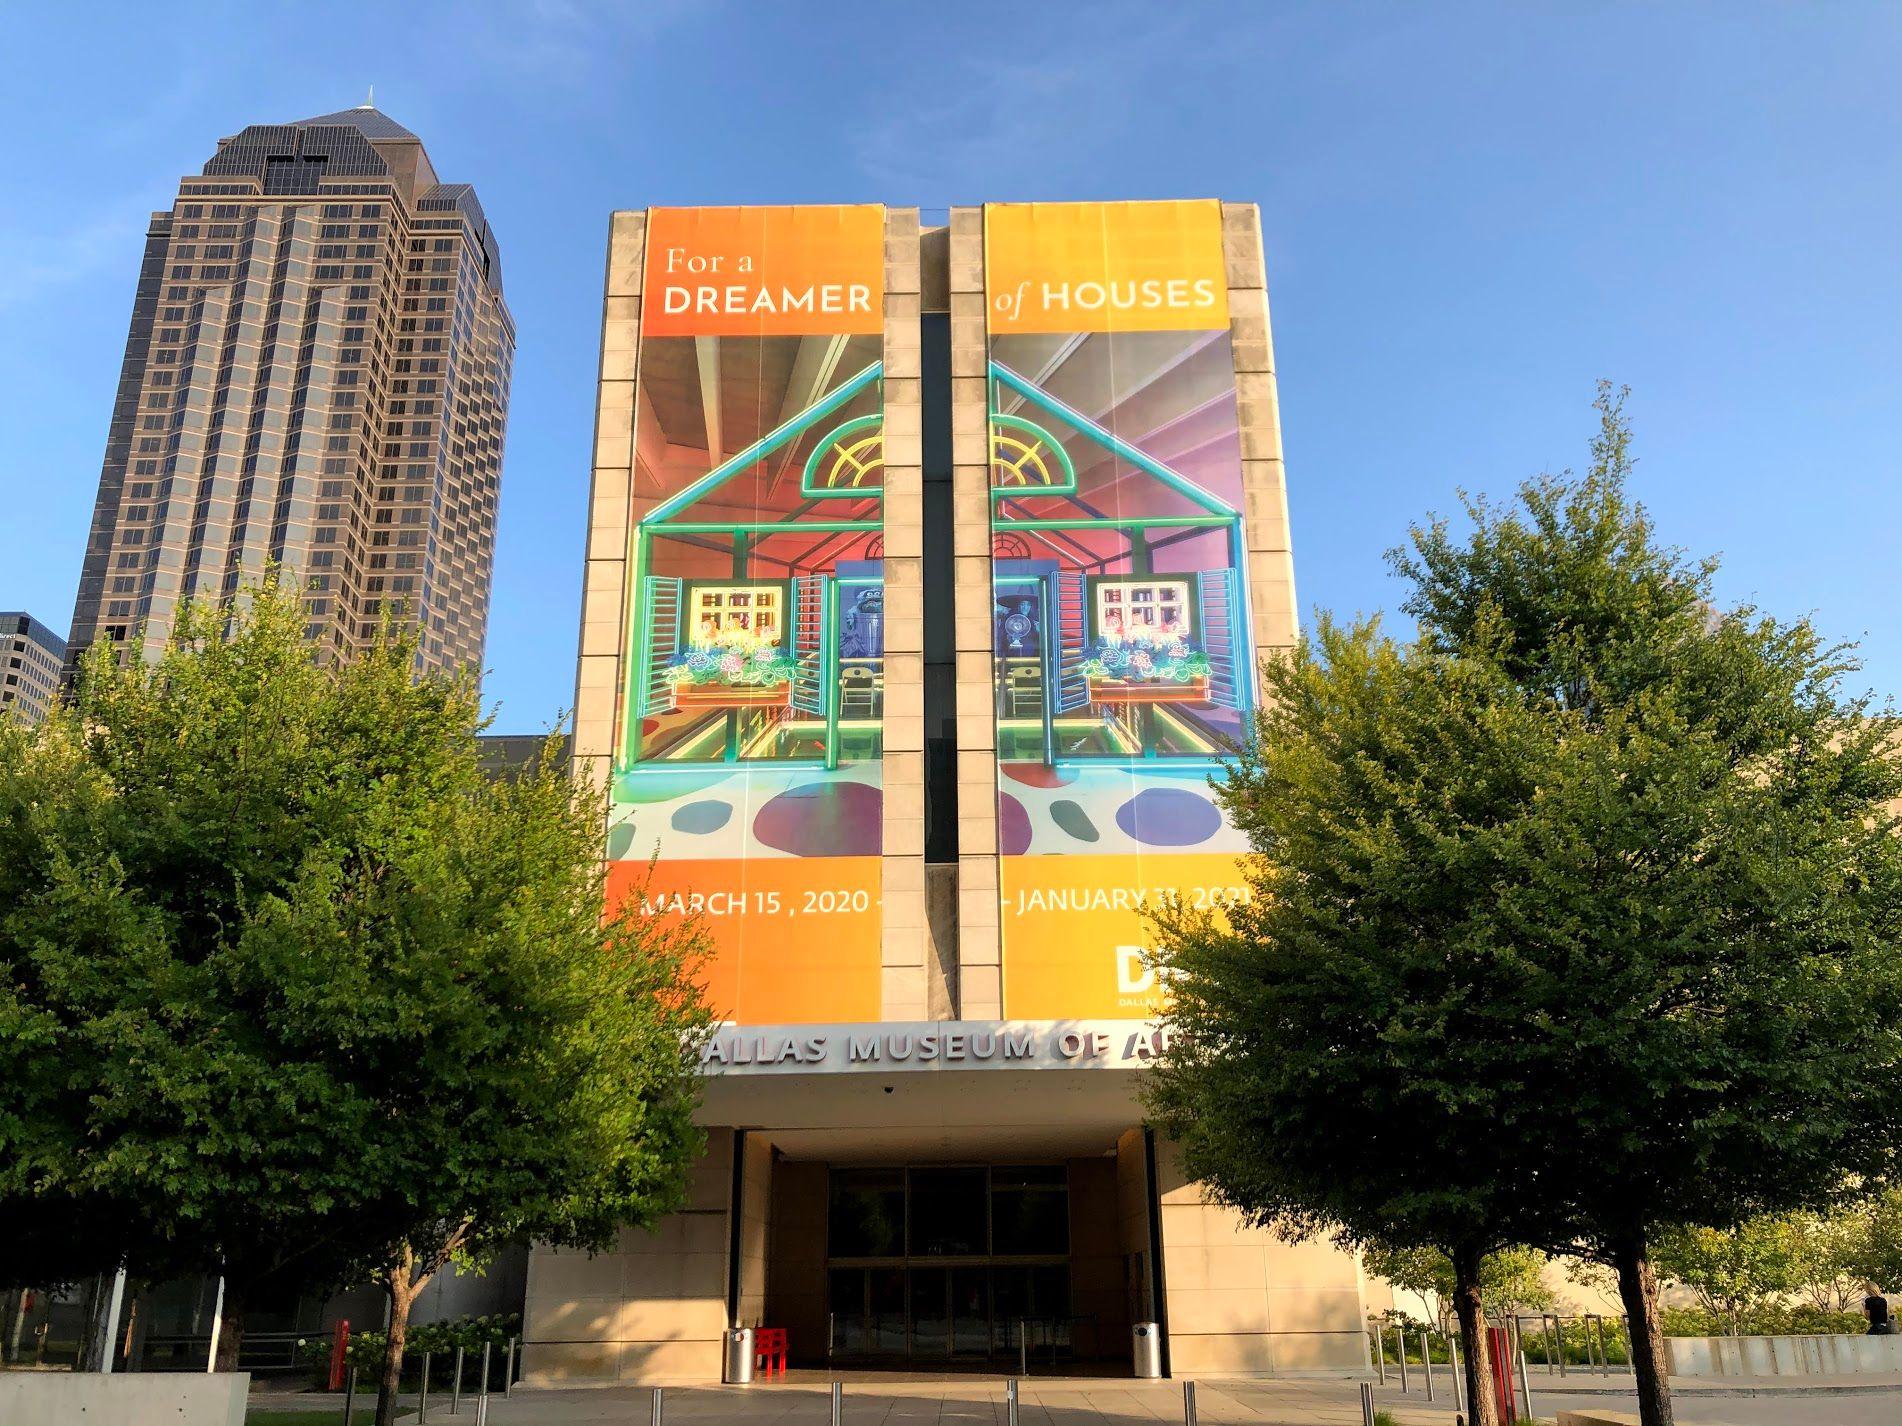 The exterior of the DMA (Dallas Art Museum) with a huge sign for the "Dreamer of Houses" special exhibition.